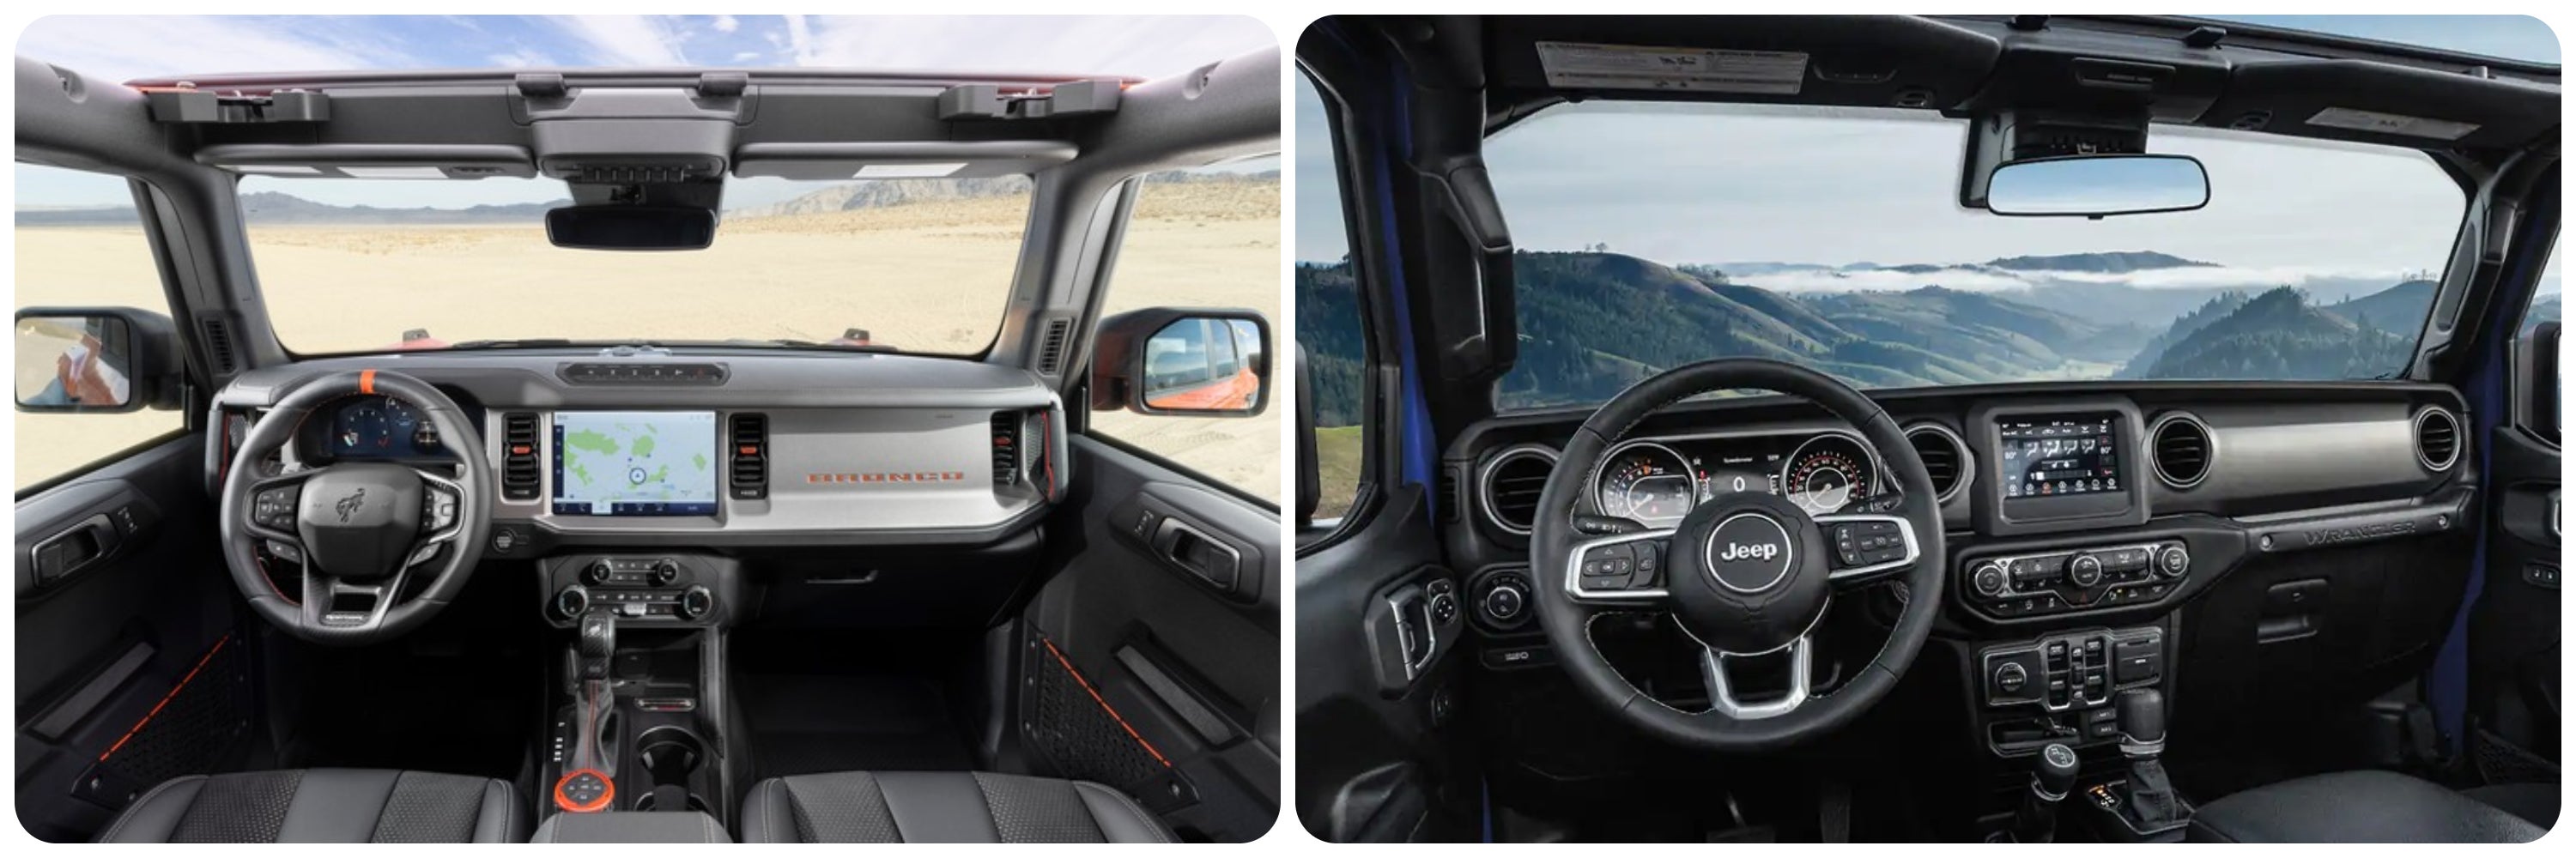 A view of the dash and infotainment systems of the 2023 Ford Bronco on the left and the 2023 Jeep Wrangler on the right.